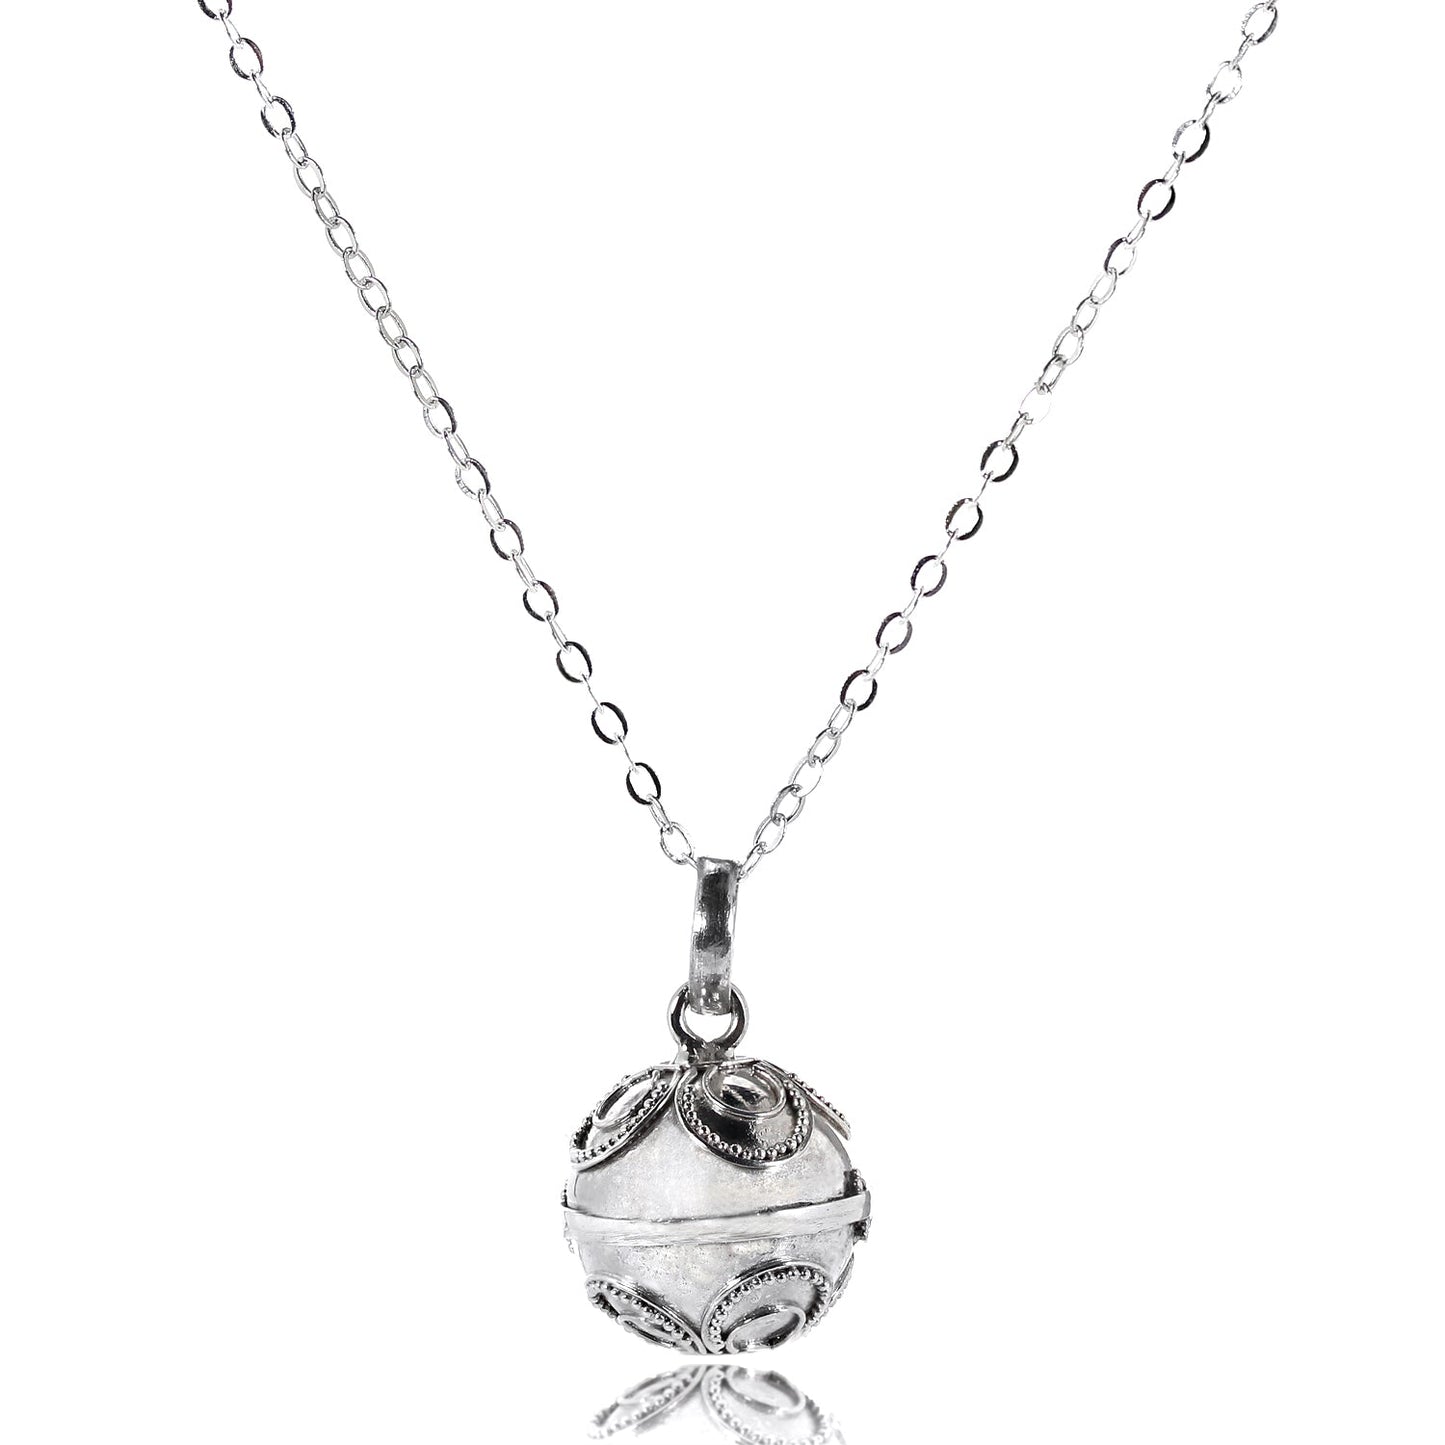 Sterling Silver Chiming Harmony Bola Pendant with Flower Design